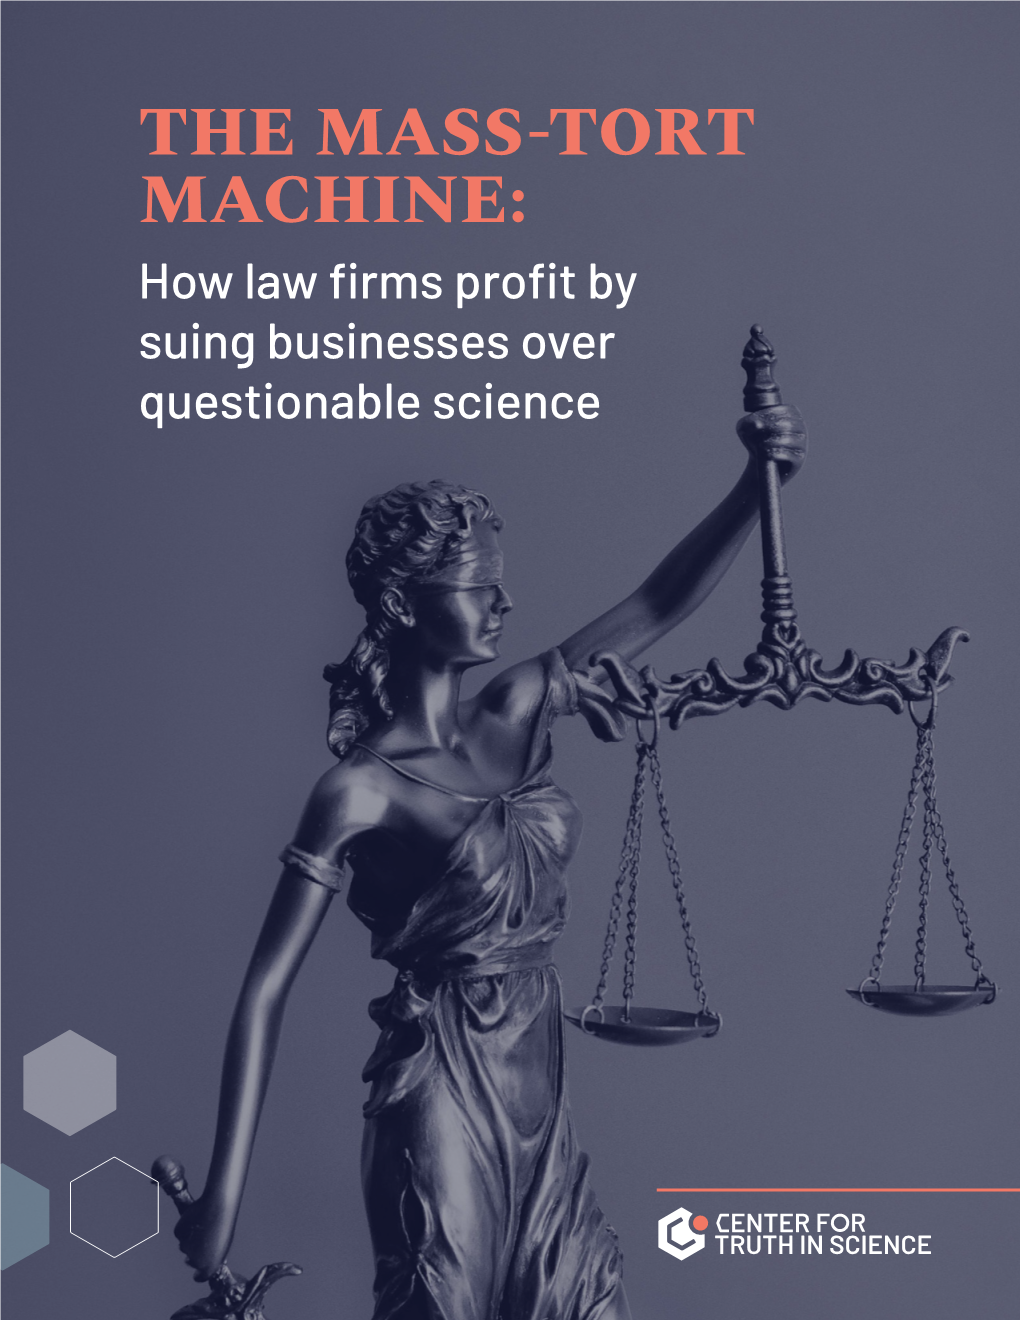 THE MASS-TORT MACHINE: How Law Firms Profit by Suing Businesses Over Questionable Science SUMMARY